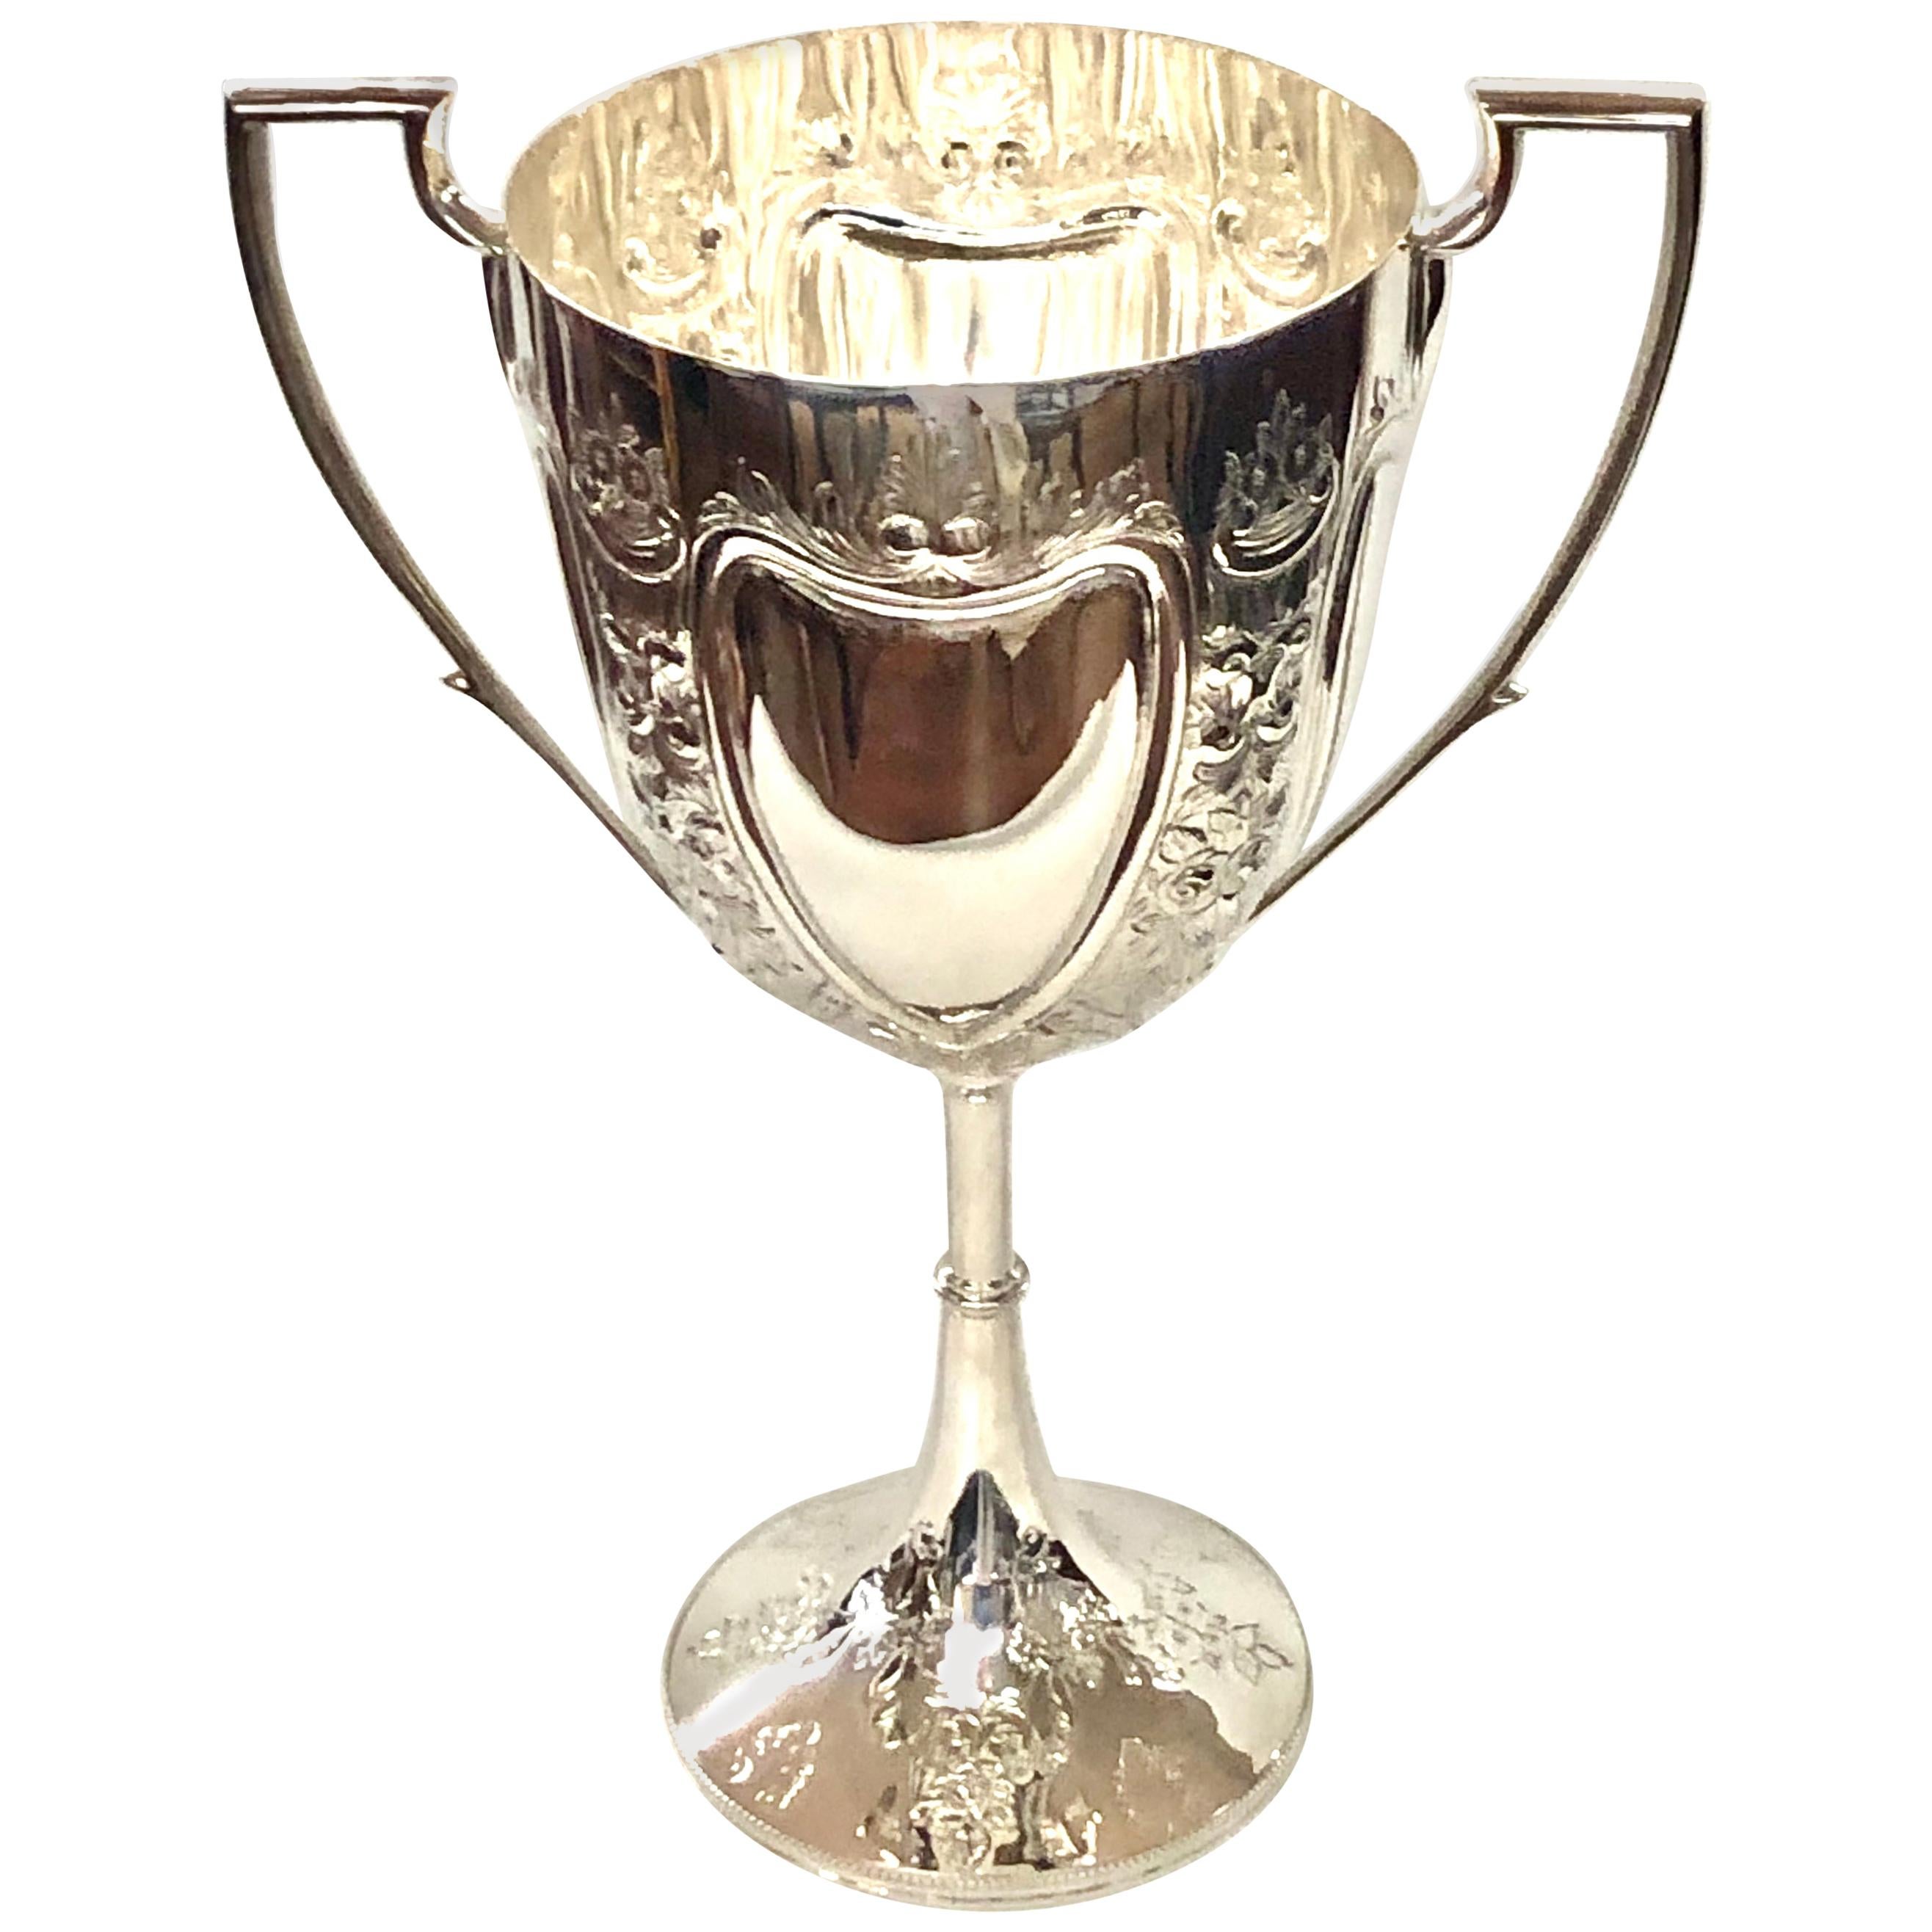 Fabulous Hand Chased English Sheffield Silver Plate Trophy or Loving Cup For Sale